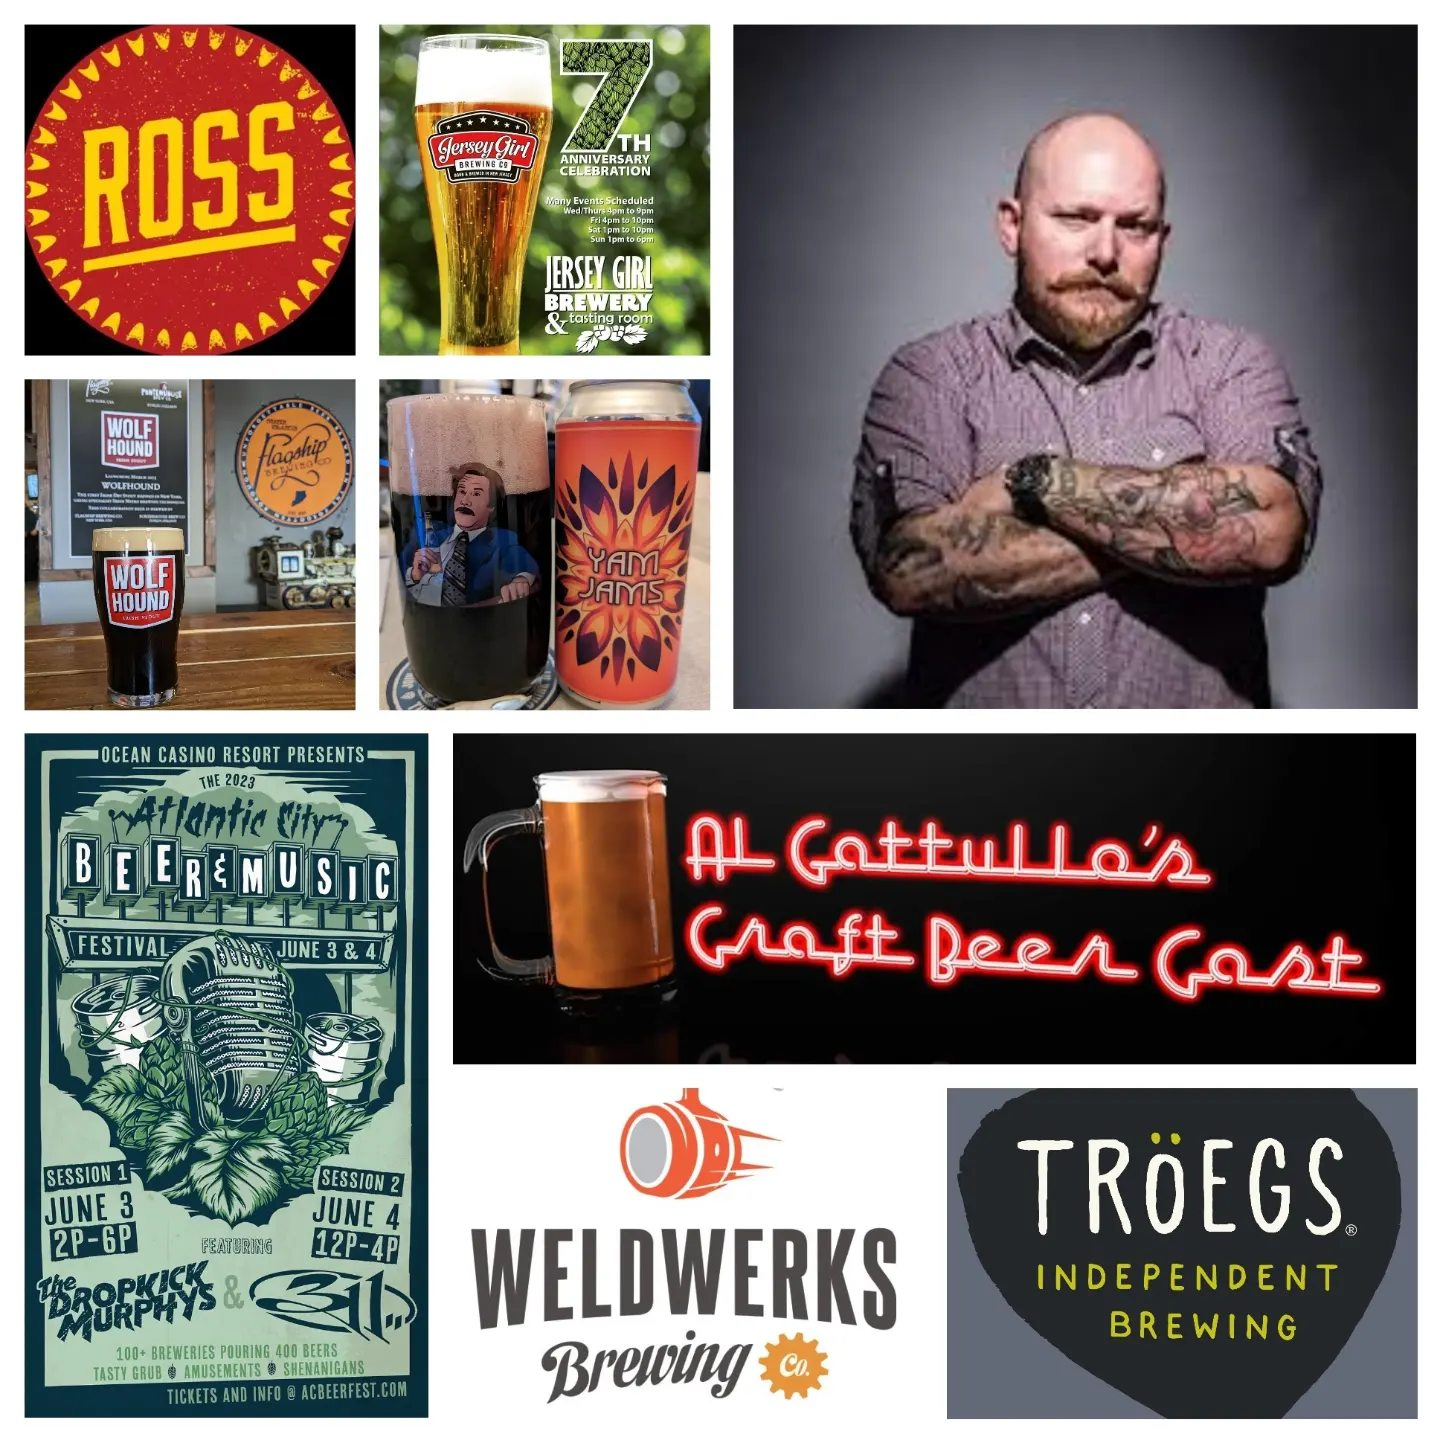 AG Craft Beer Cast 4-2-23 AC Beer and Music Fest